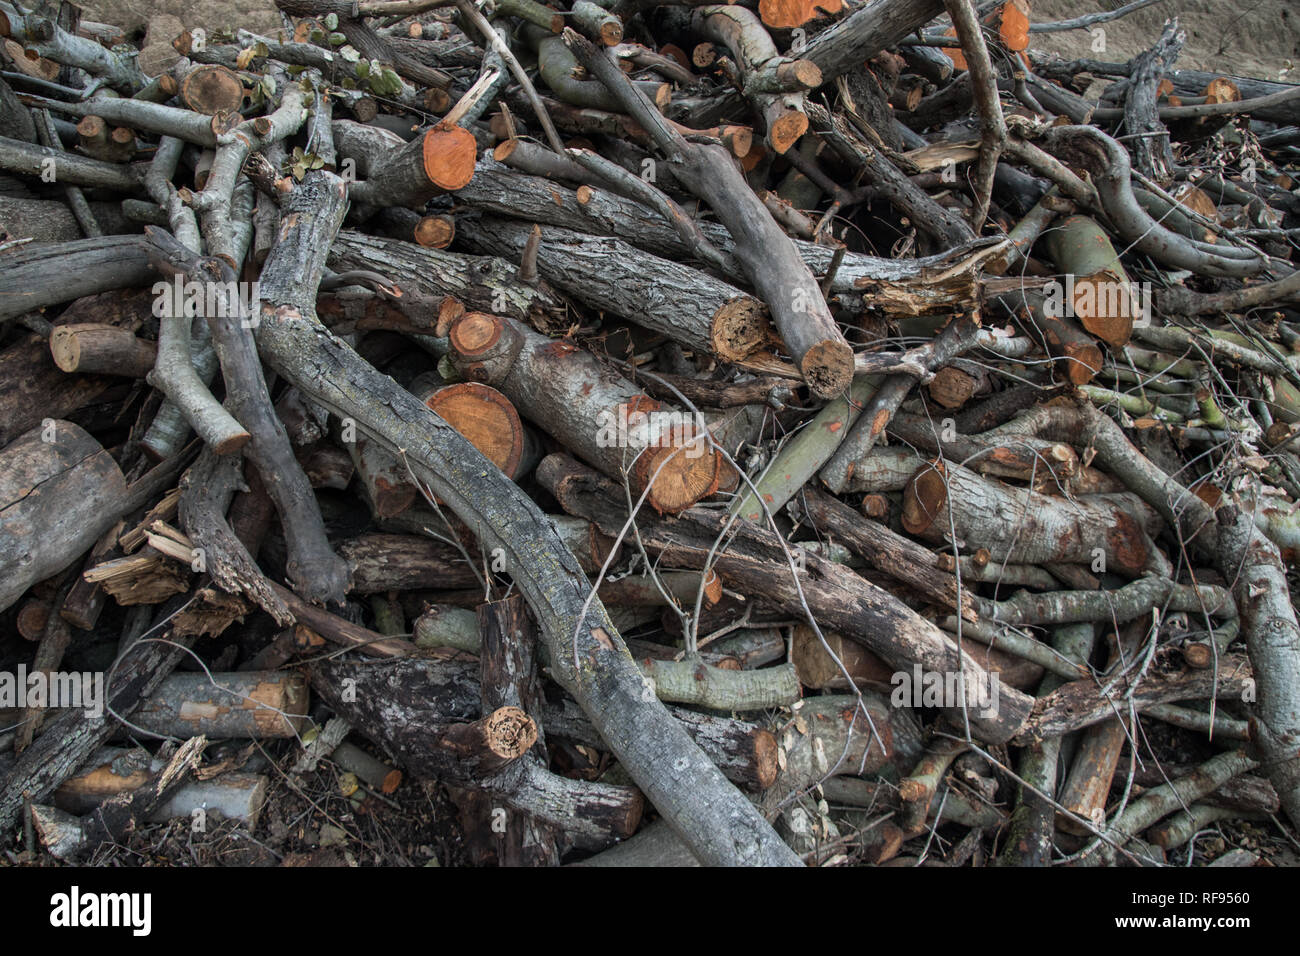 Several branches in a haphazard pile. Stock Photo